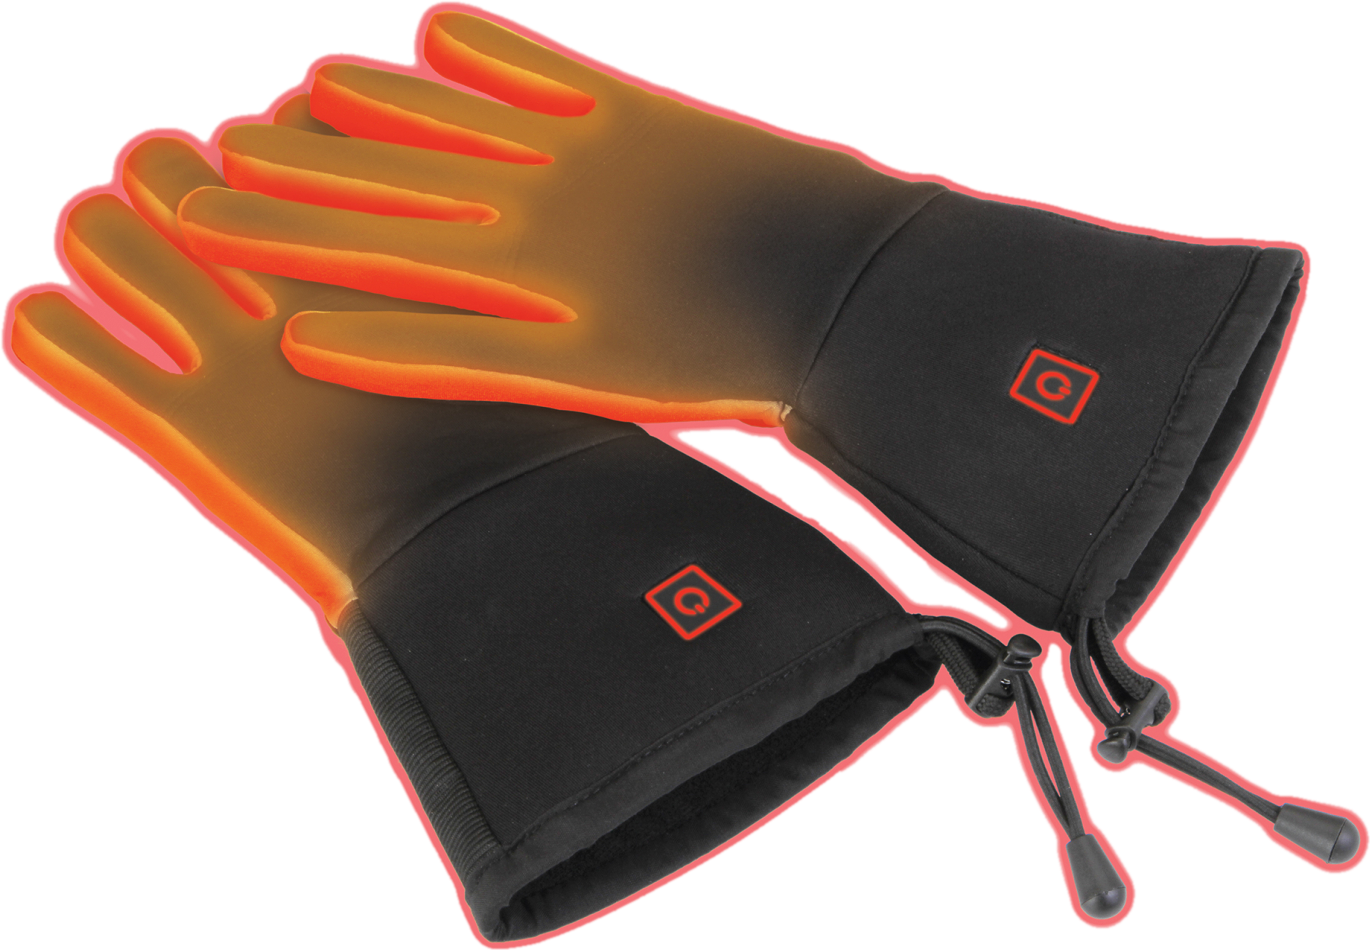 Thermo Gloves Home (FR)